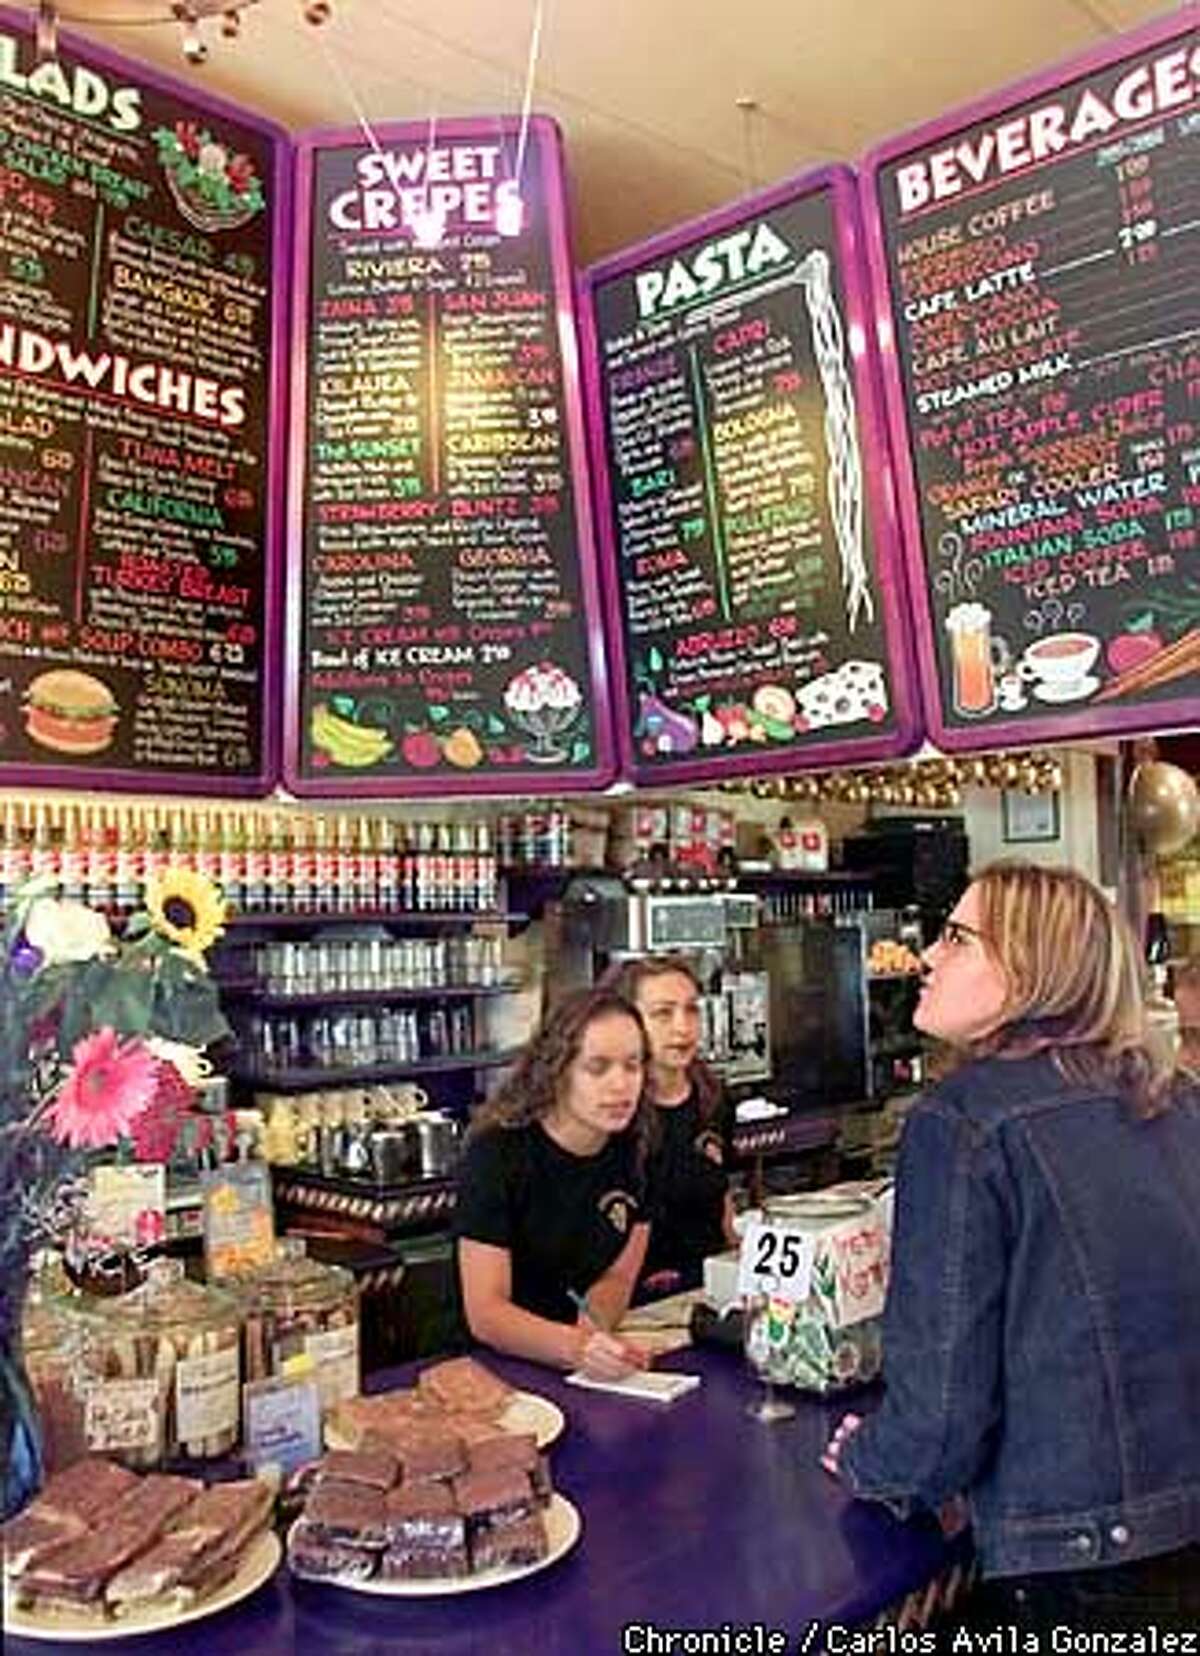 Wait staff at Crepevine in San Francisco, Ca., help customers on Wednesday, September 5, 2001. (Photo by Carlos Avila Gonzalez/The San Francisco Chronicle)